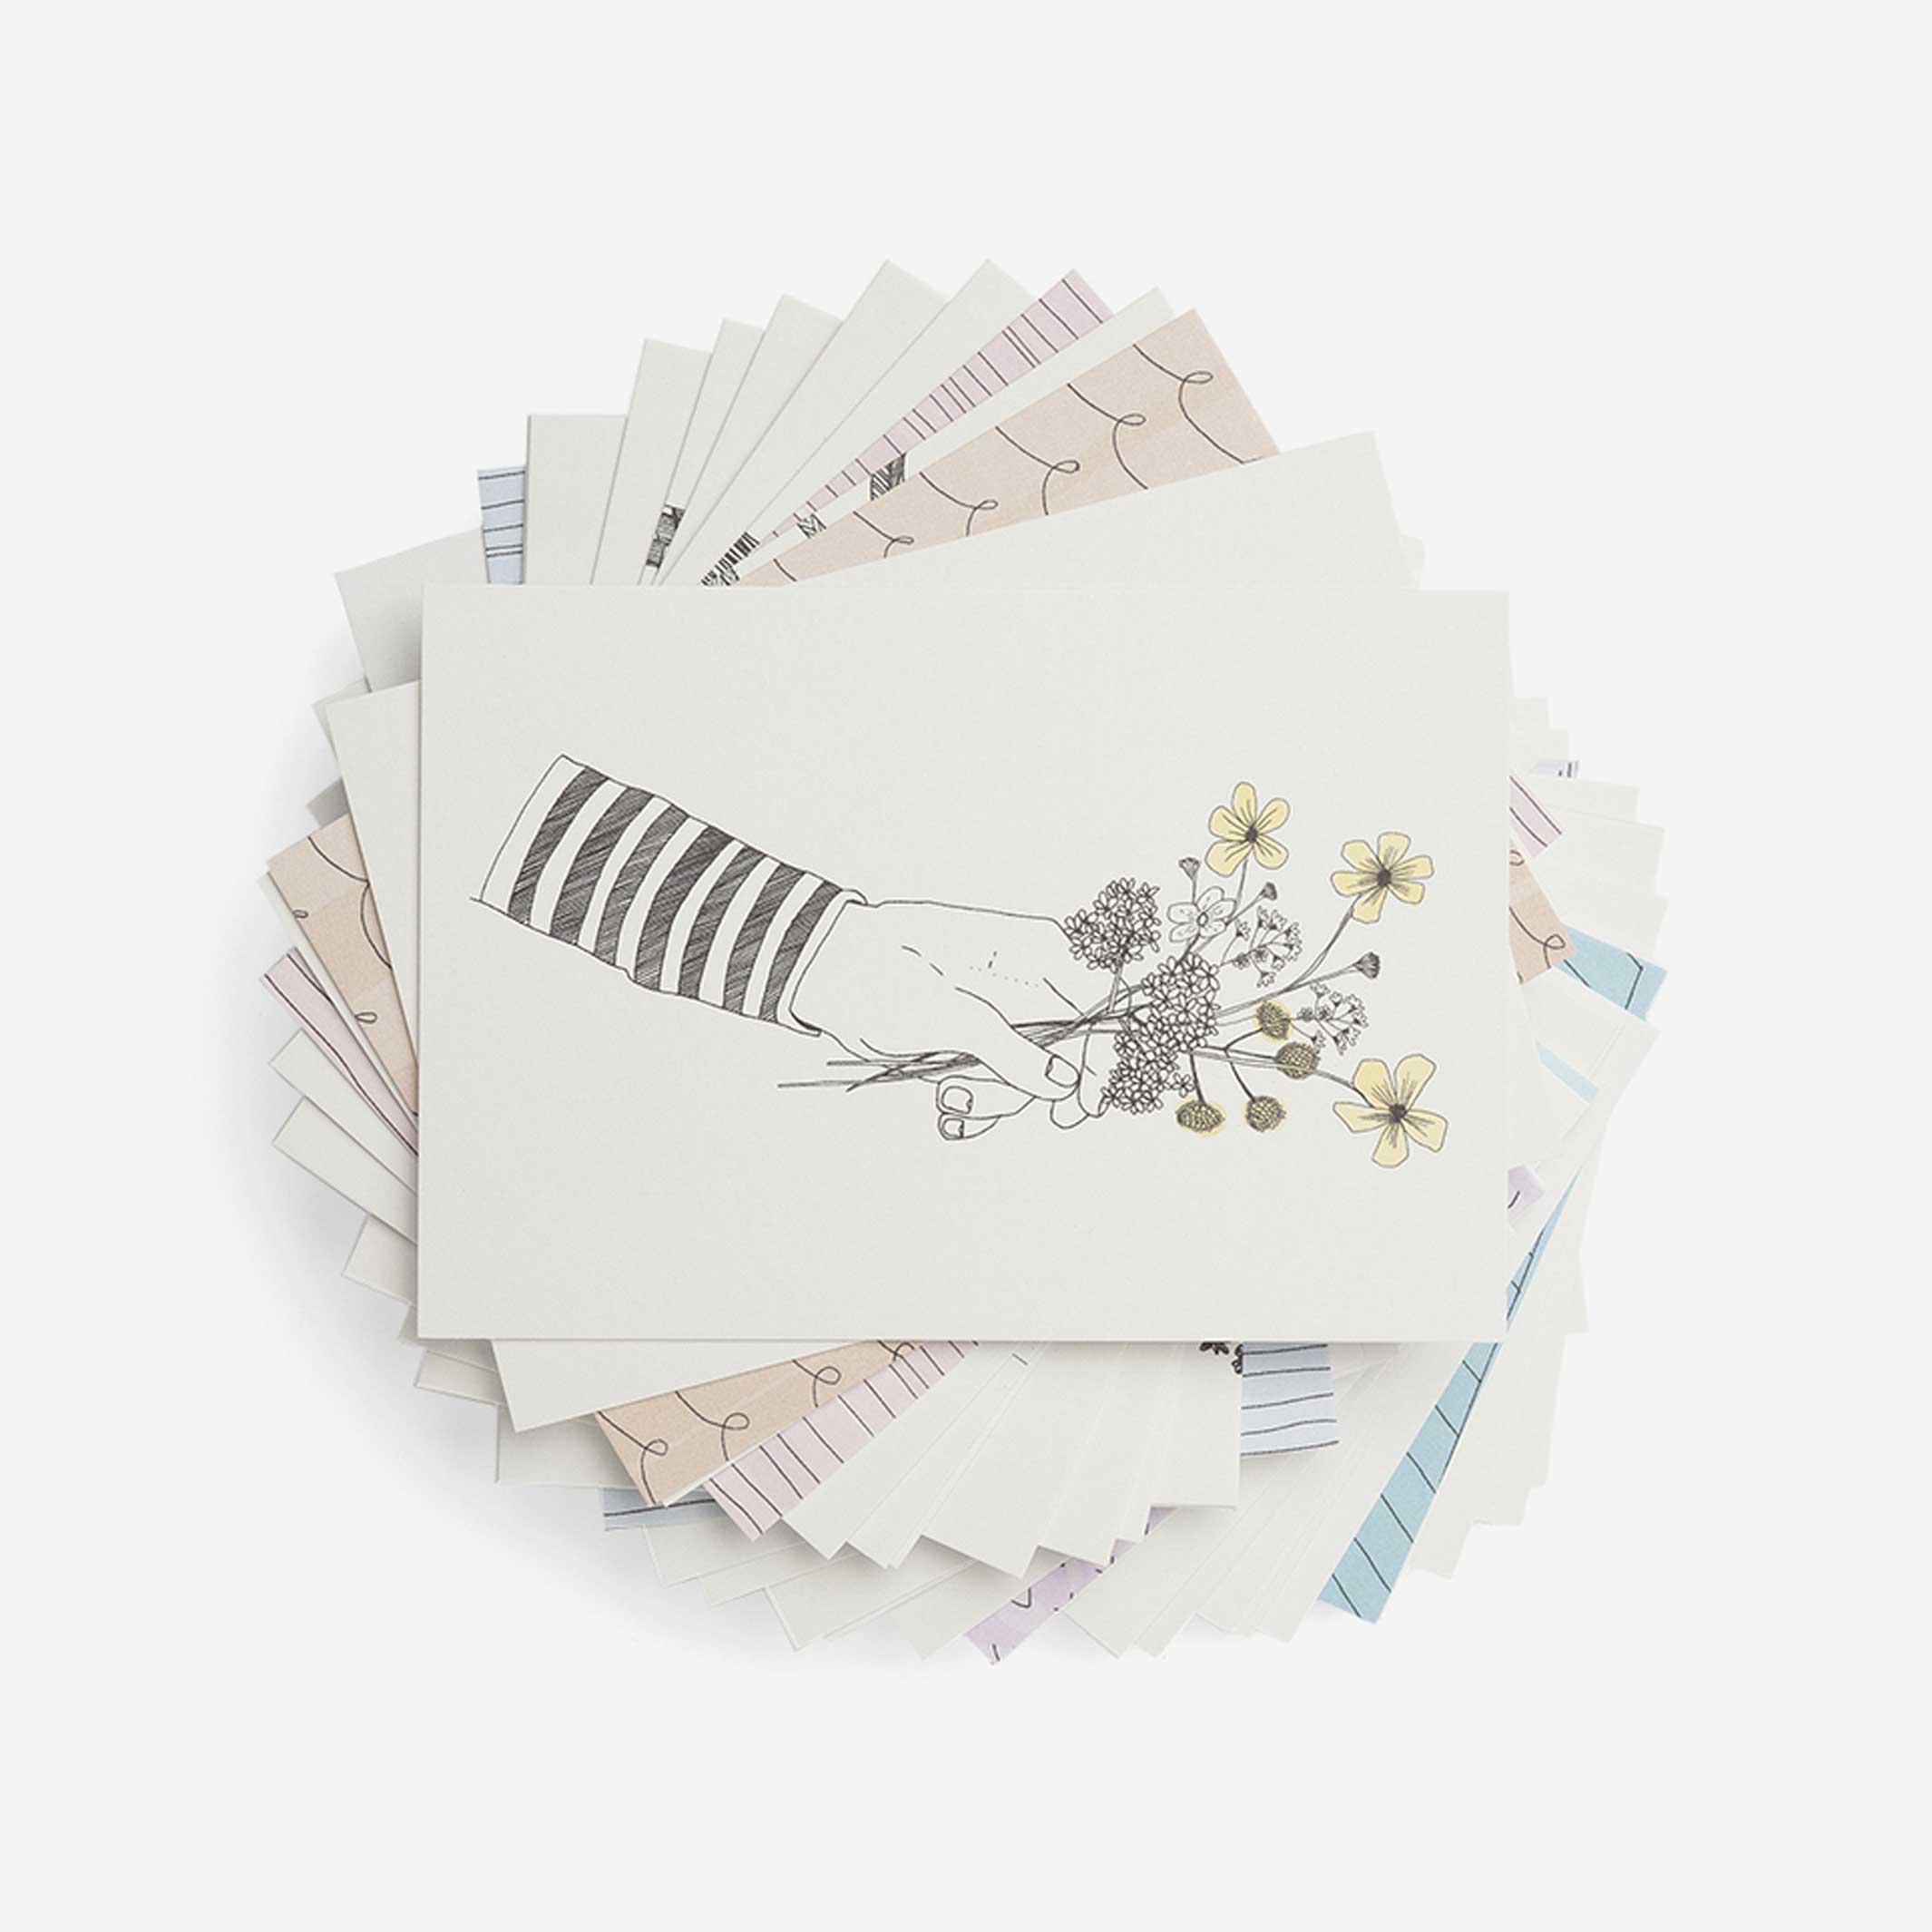 KINDNESS | CARD SET | English Edition | The School of Life